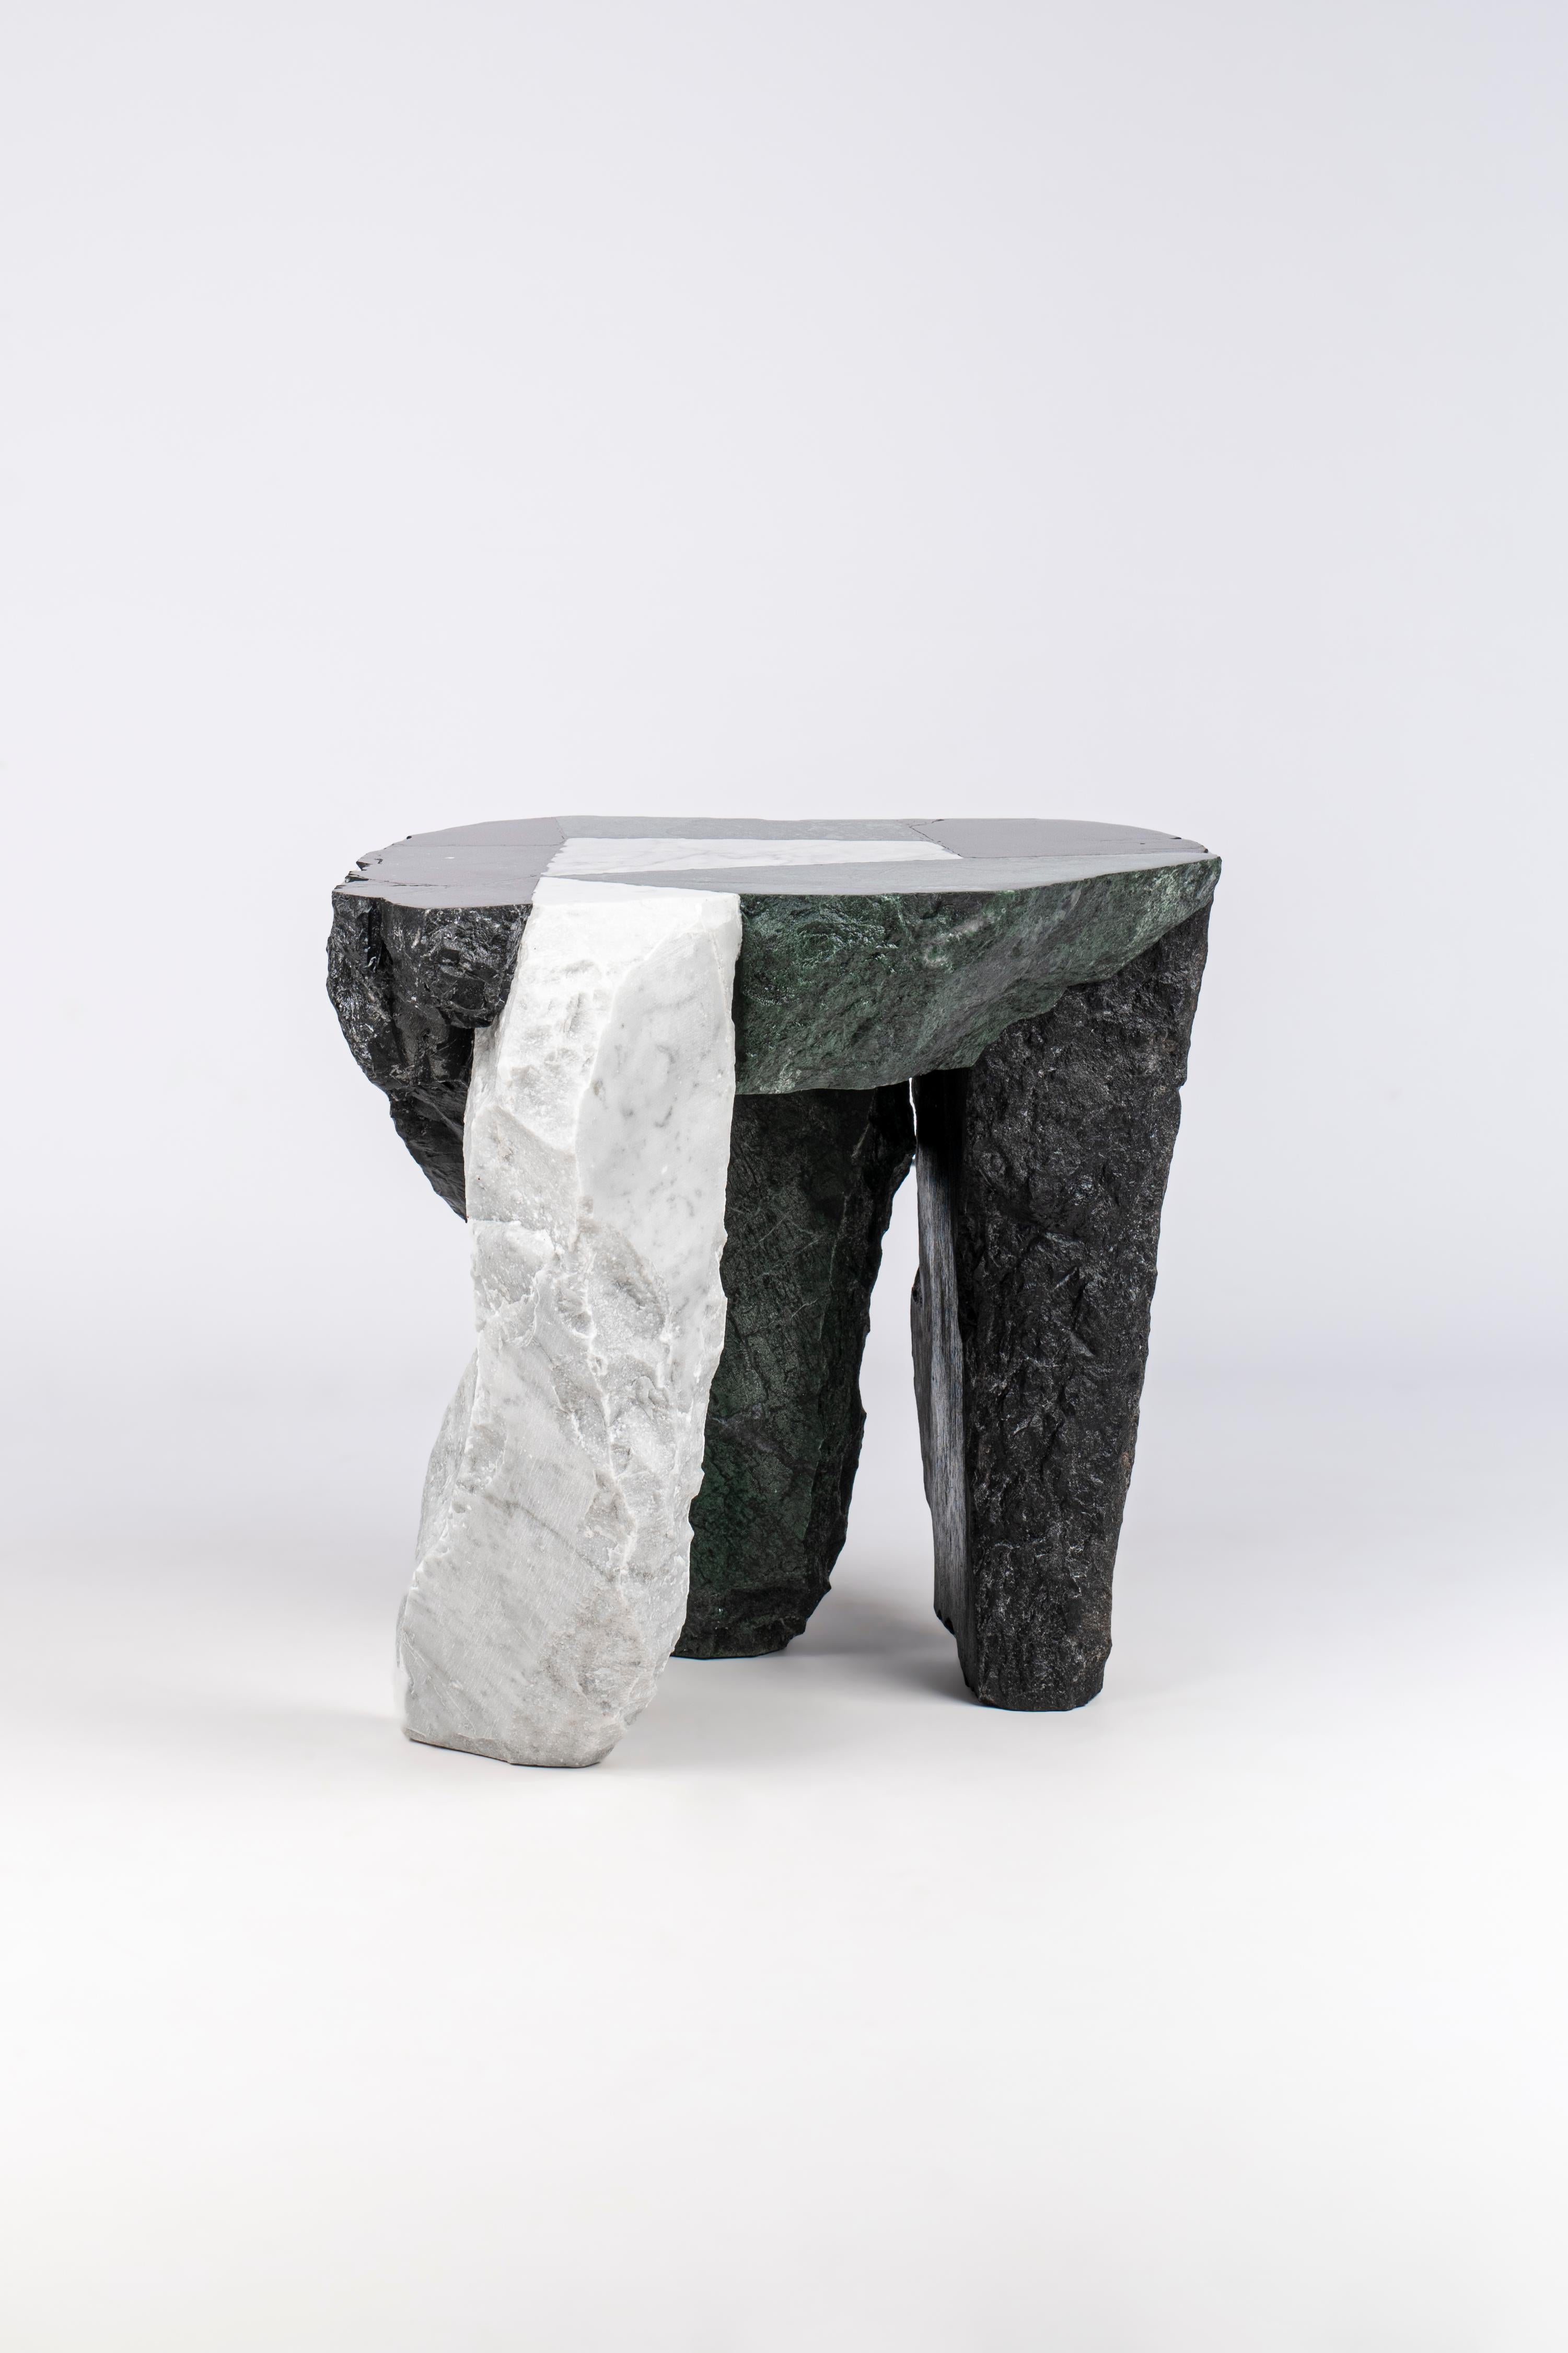 Miscellaneous investigates the concept of “variety” understood as relative, unique and unpredictable. For the realization of the project, a series of scraps fragments from the marble sculptures were recovered and collected; many pieces of matter